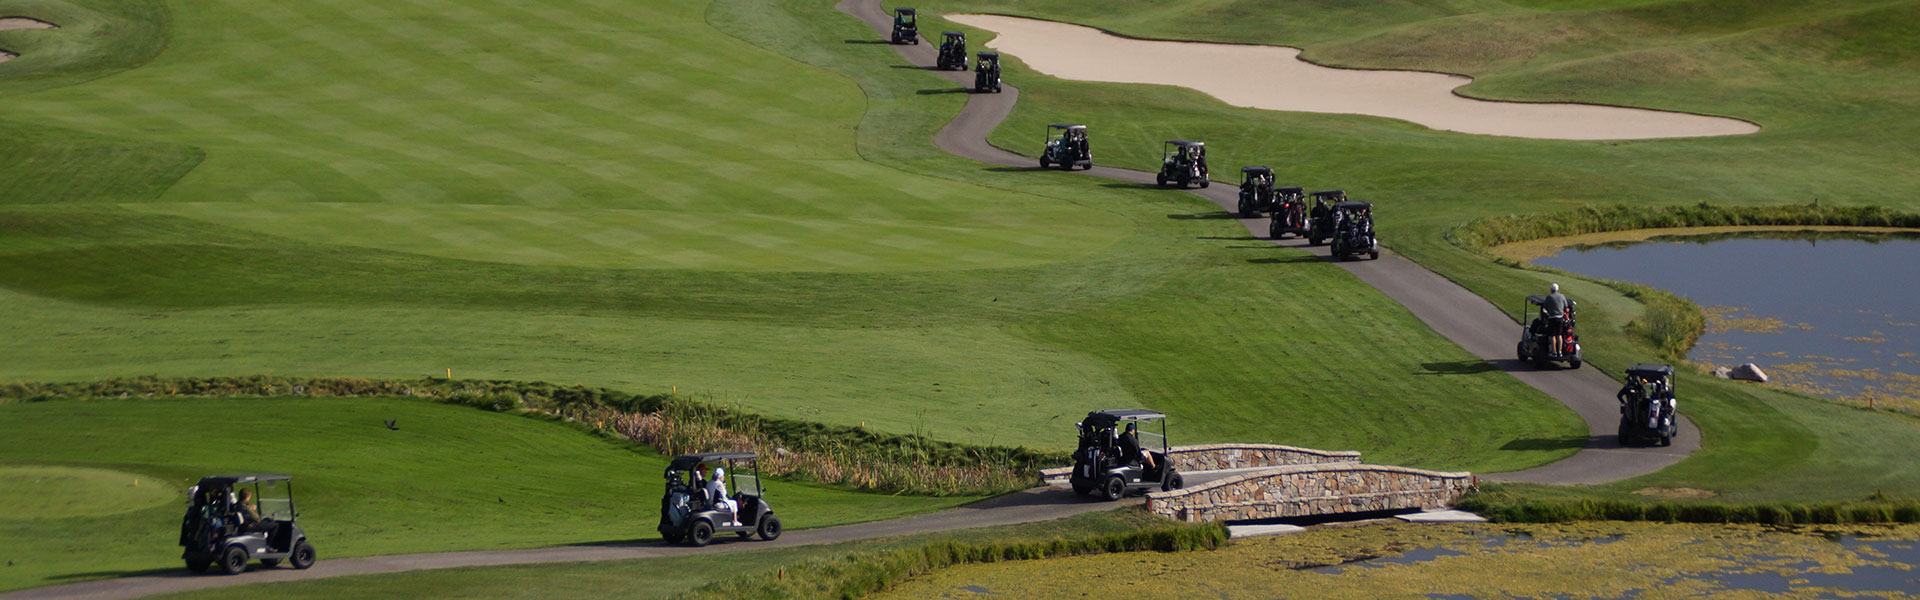 Okanagan Limousine offers private transportation to any golf course or other corporate event in British Columbia.